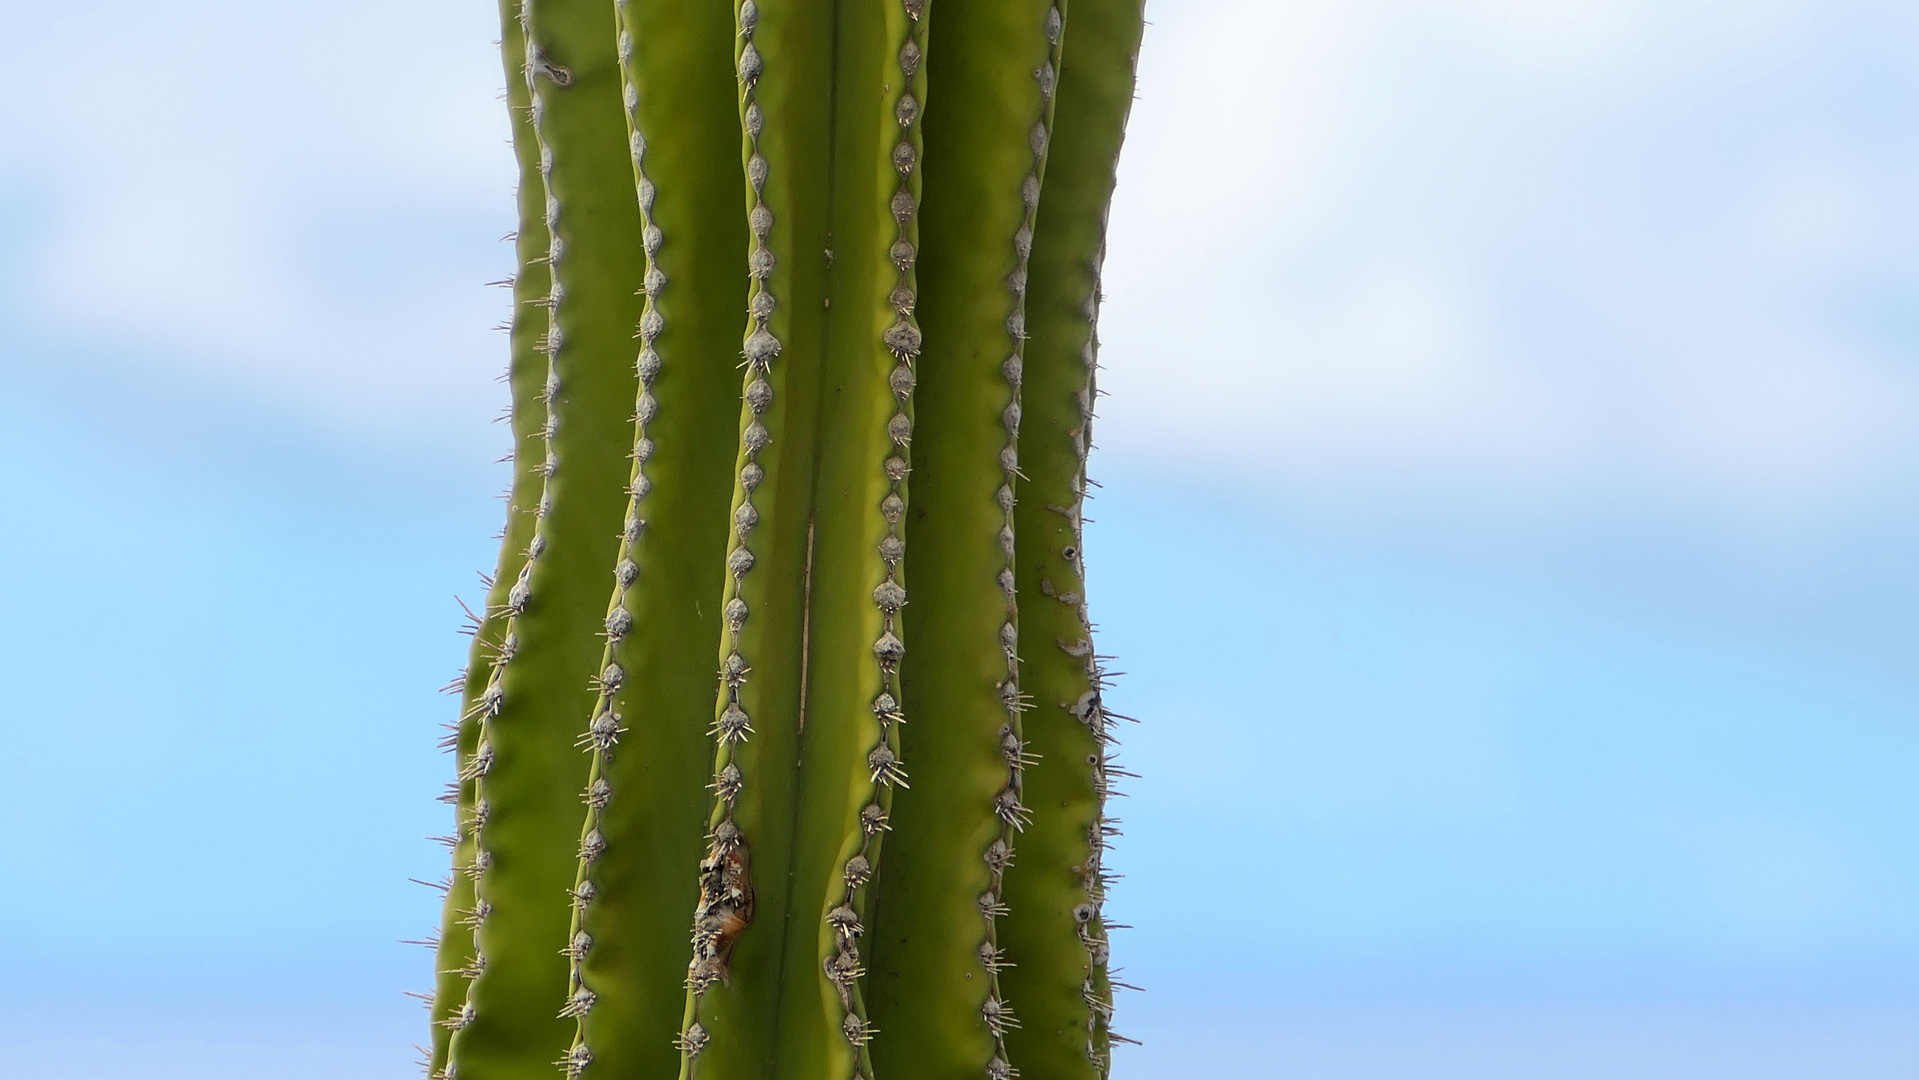 ... ribs of an old cactus